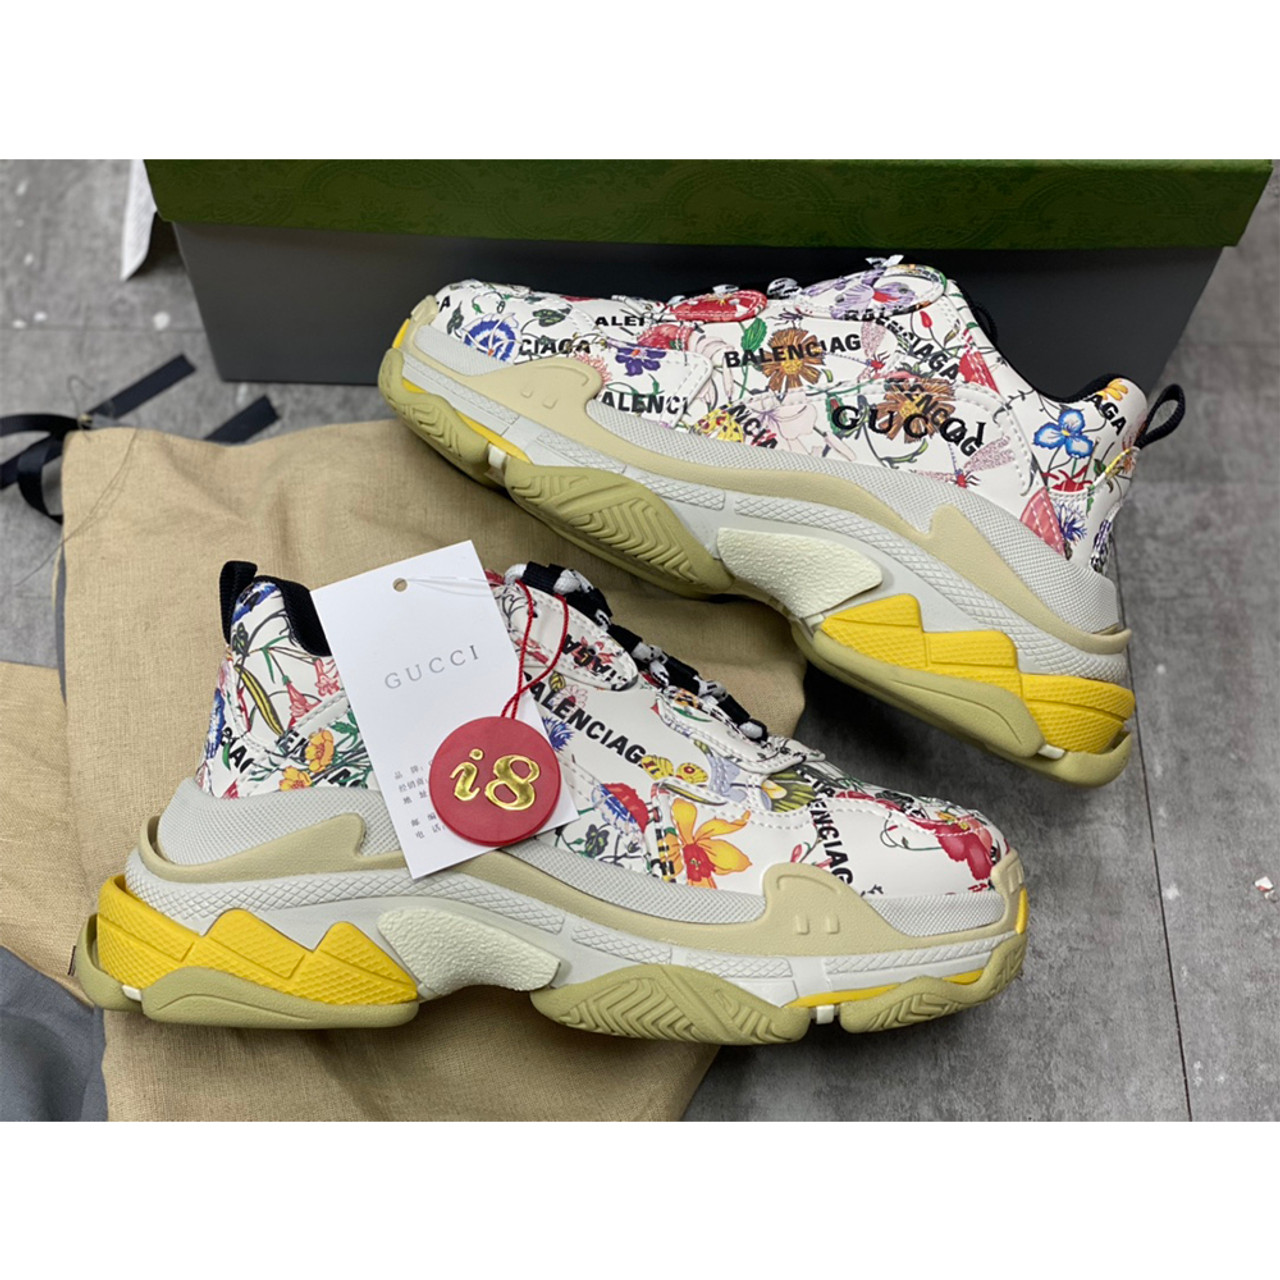 Wholesale Louis's Vuitton's Replica Lv's Balenciaga's Man Gucci's Designer  Nike's Jordan's 4 Factory in China Online Store Adidas's Shoes Yeezy  Branded Woman 4X - China Shoes and Branded Shoe price